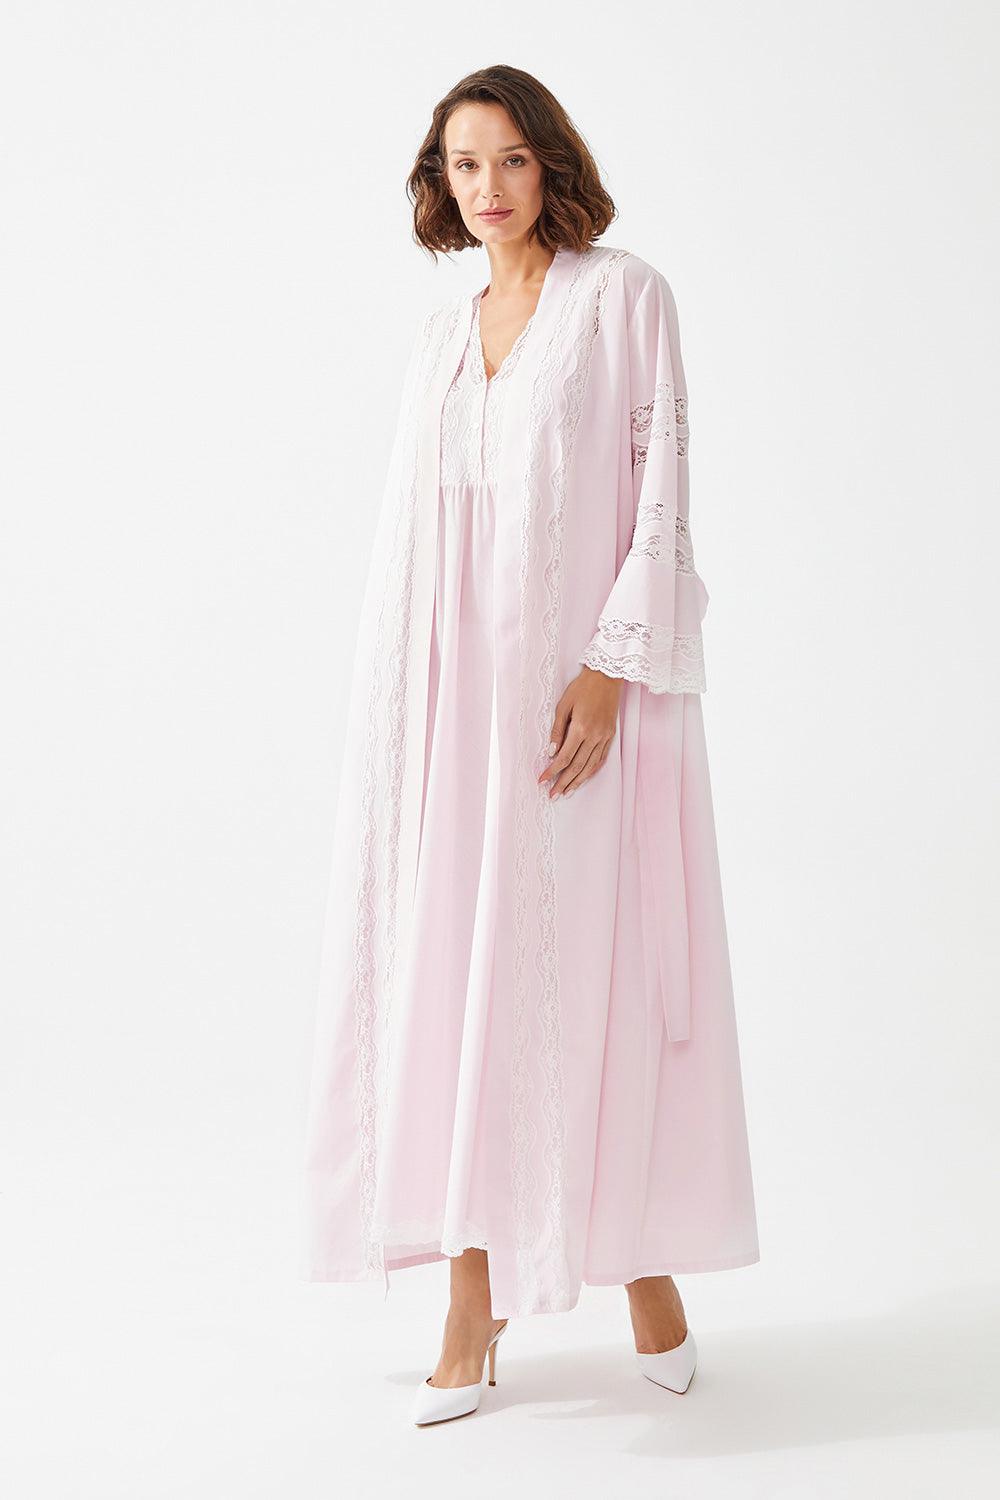 Leilani Trimmed Cotton Voile Long Sleeve Robe Set - Baby Pink - Bocan